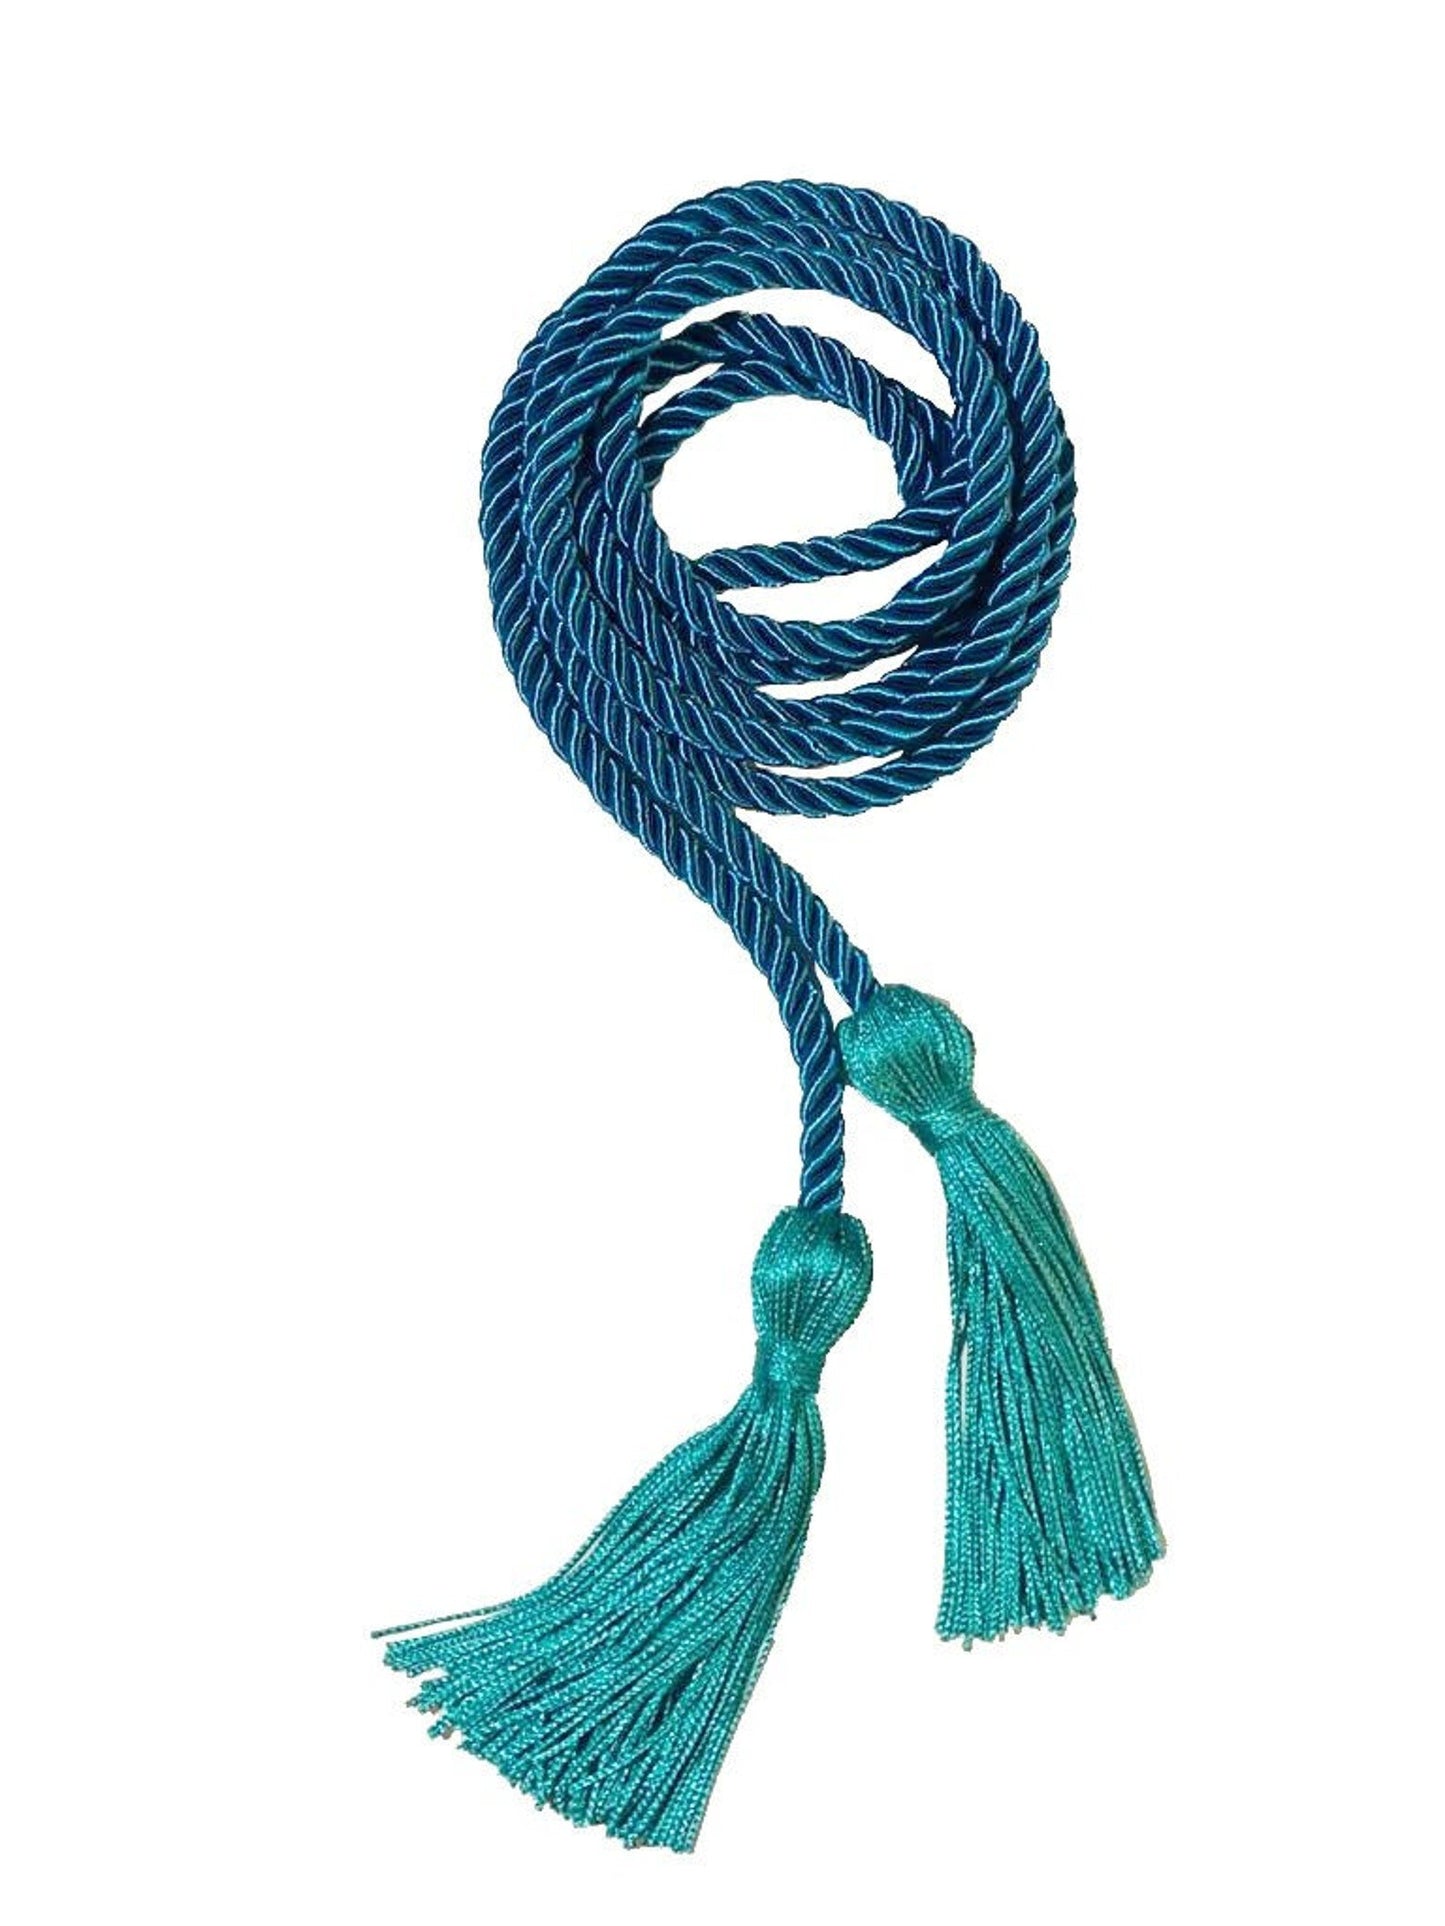 Teal Graduation Honor Cord - College & High School Honor Cords